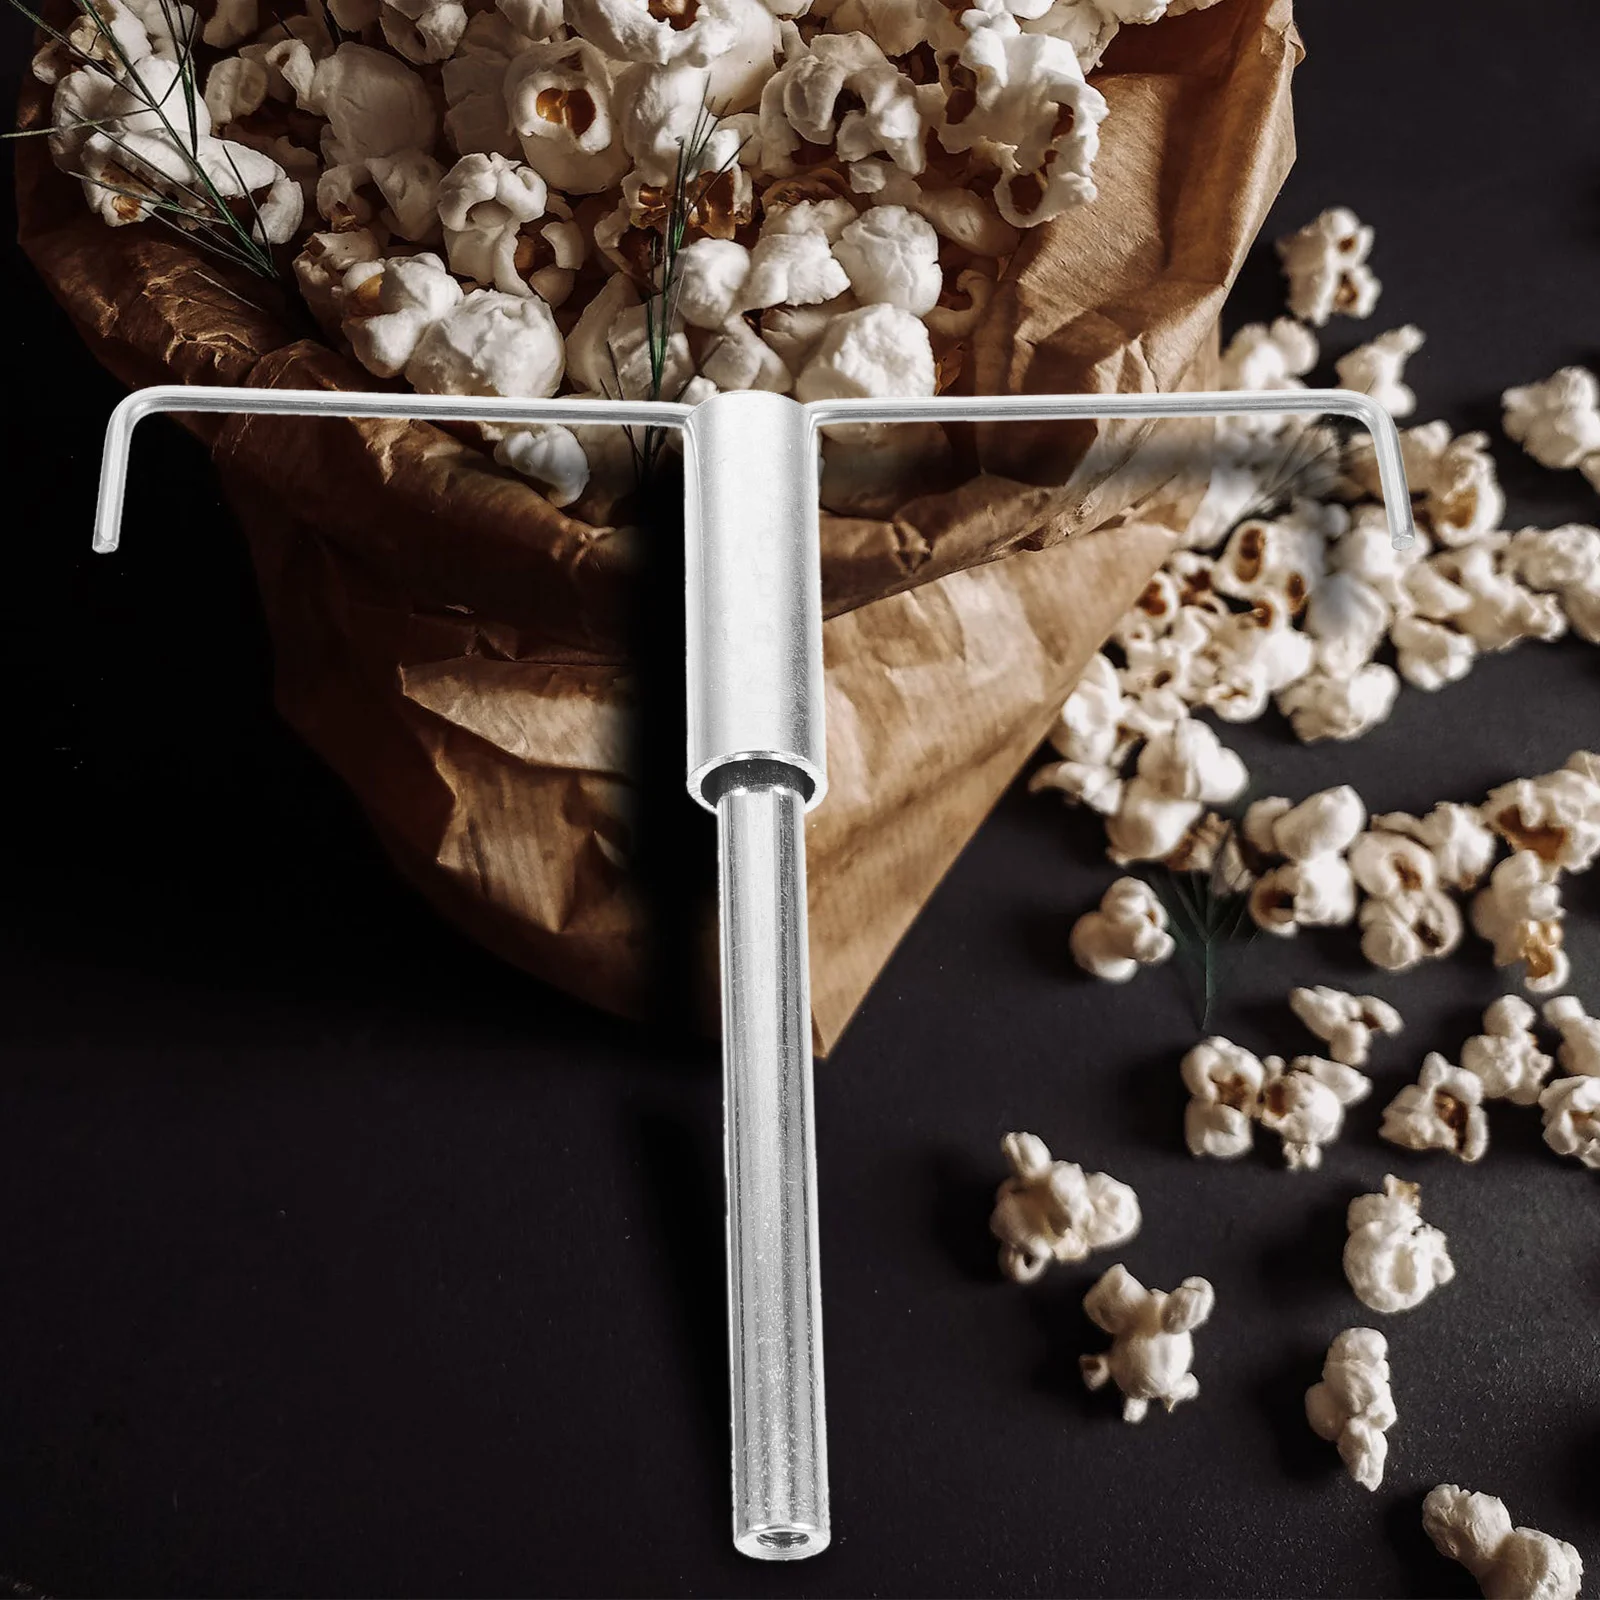 Commercial Popcorn Machine Stirrer Shaft Wire Sleeve Accessories Maker Parts Stirring Rods Mixing Sticks Mixer for Pot Cover